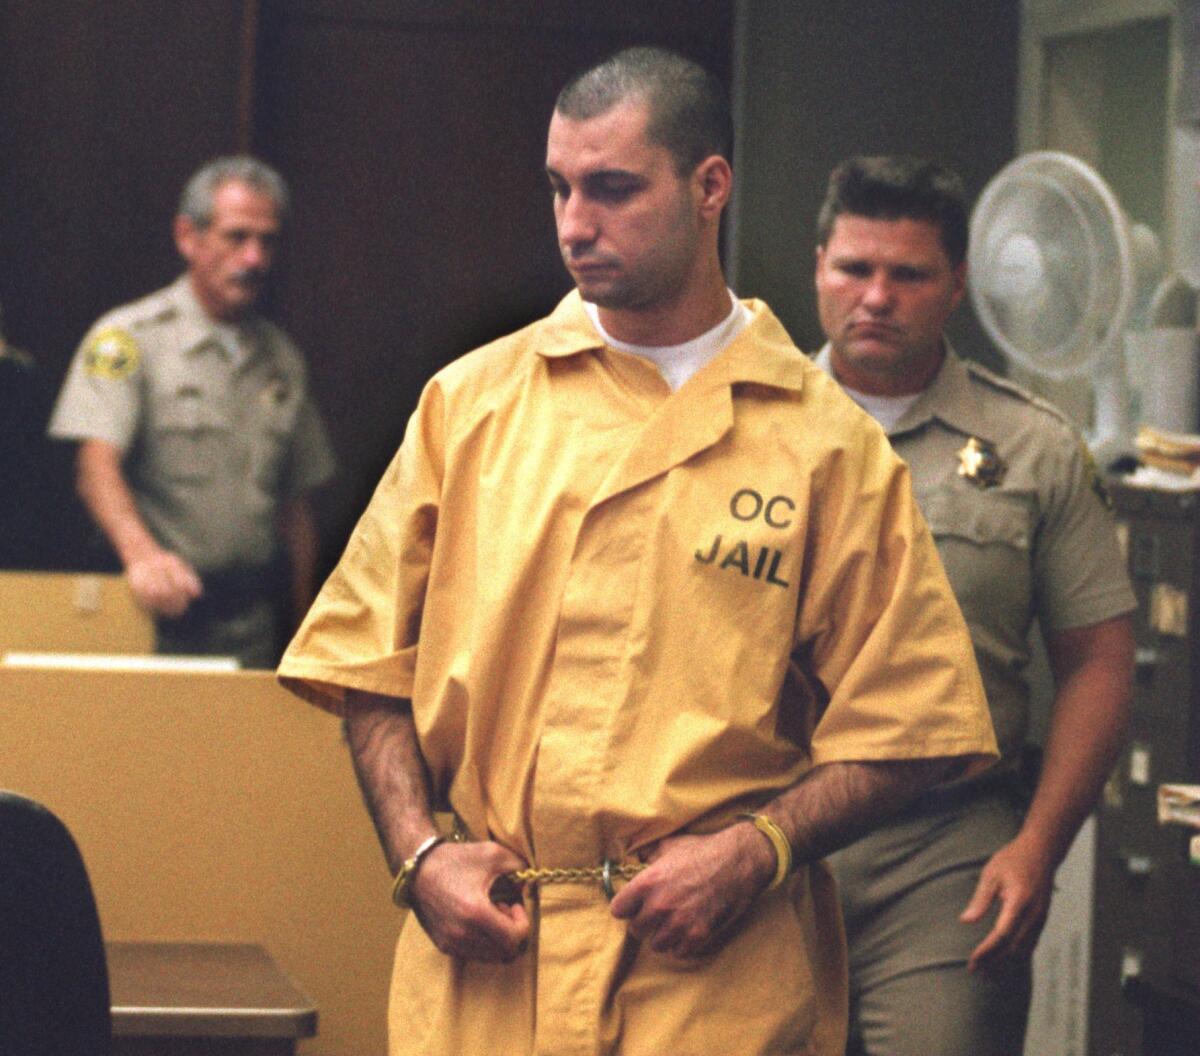 Edward Charles III during a 1996 court appearance. The California Supreme Court on Monday upheld a death sentence for Charles, who was convicted of killing his family.